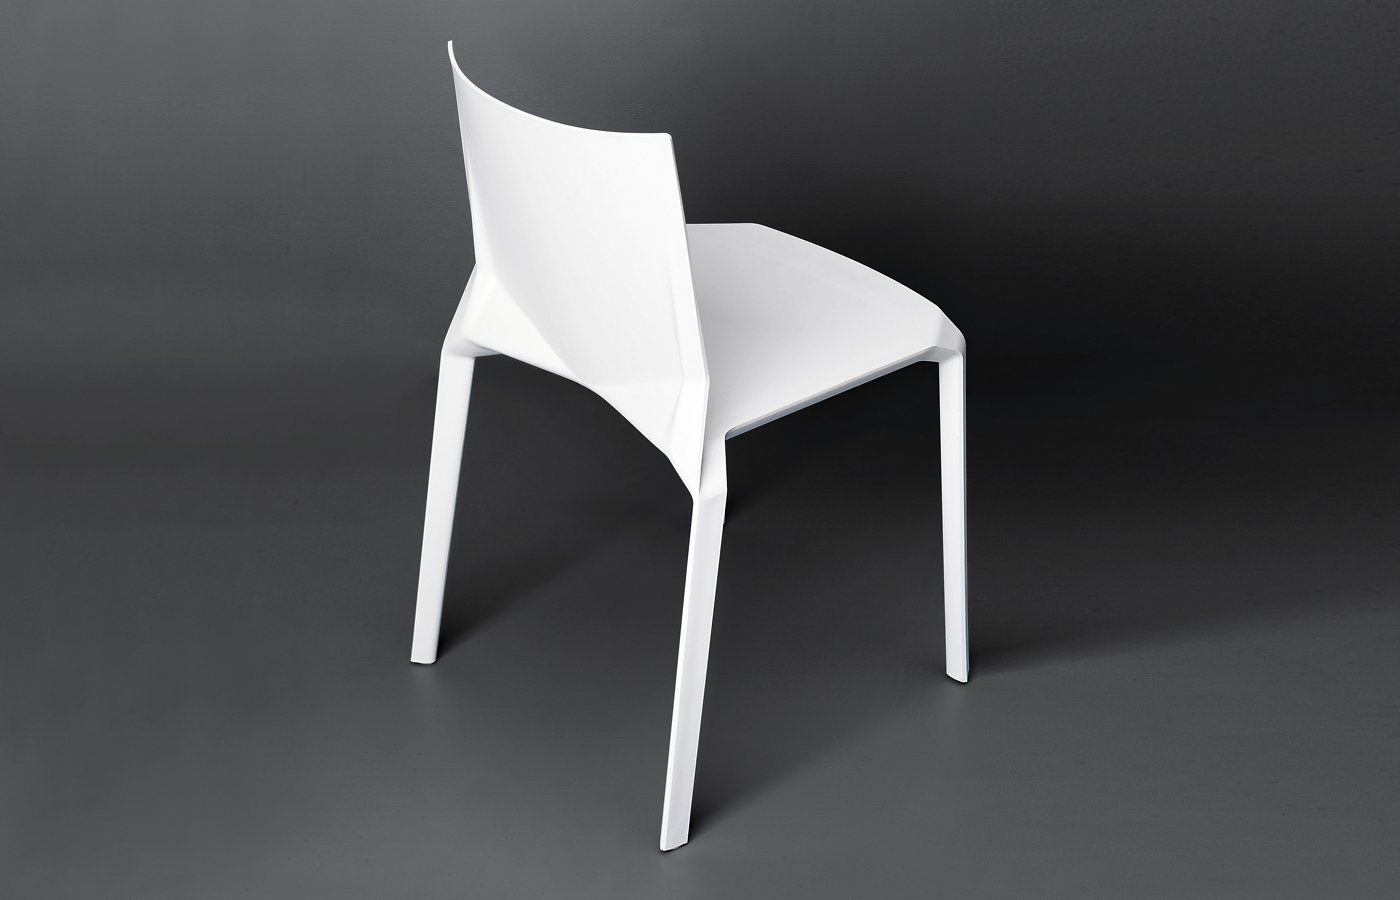 Plana Chair from Kristalia, designed by Lucidipevere